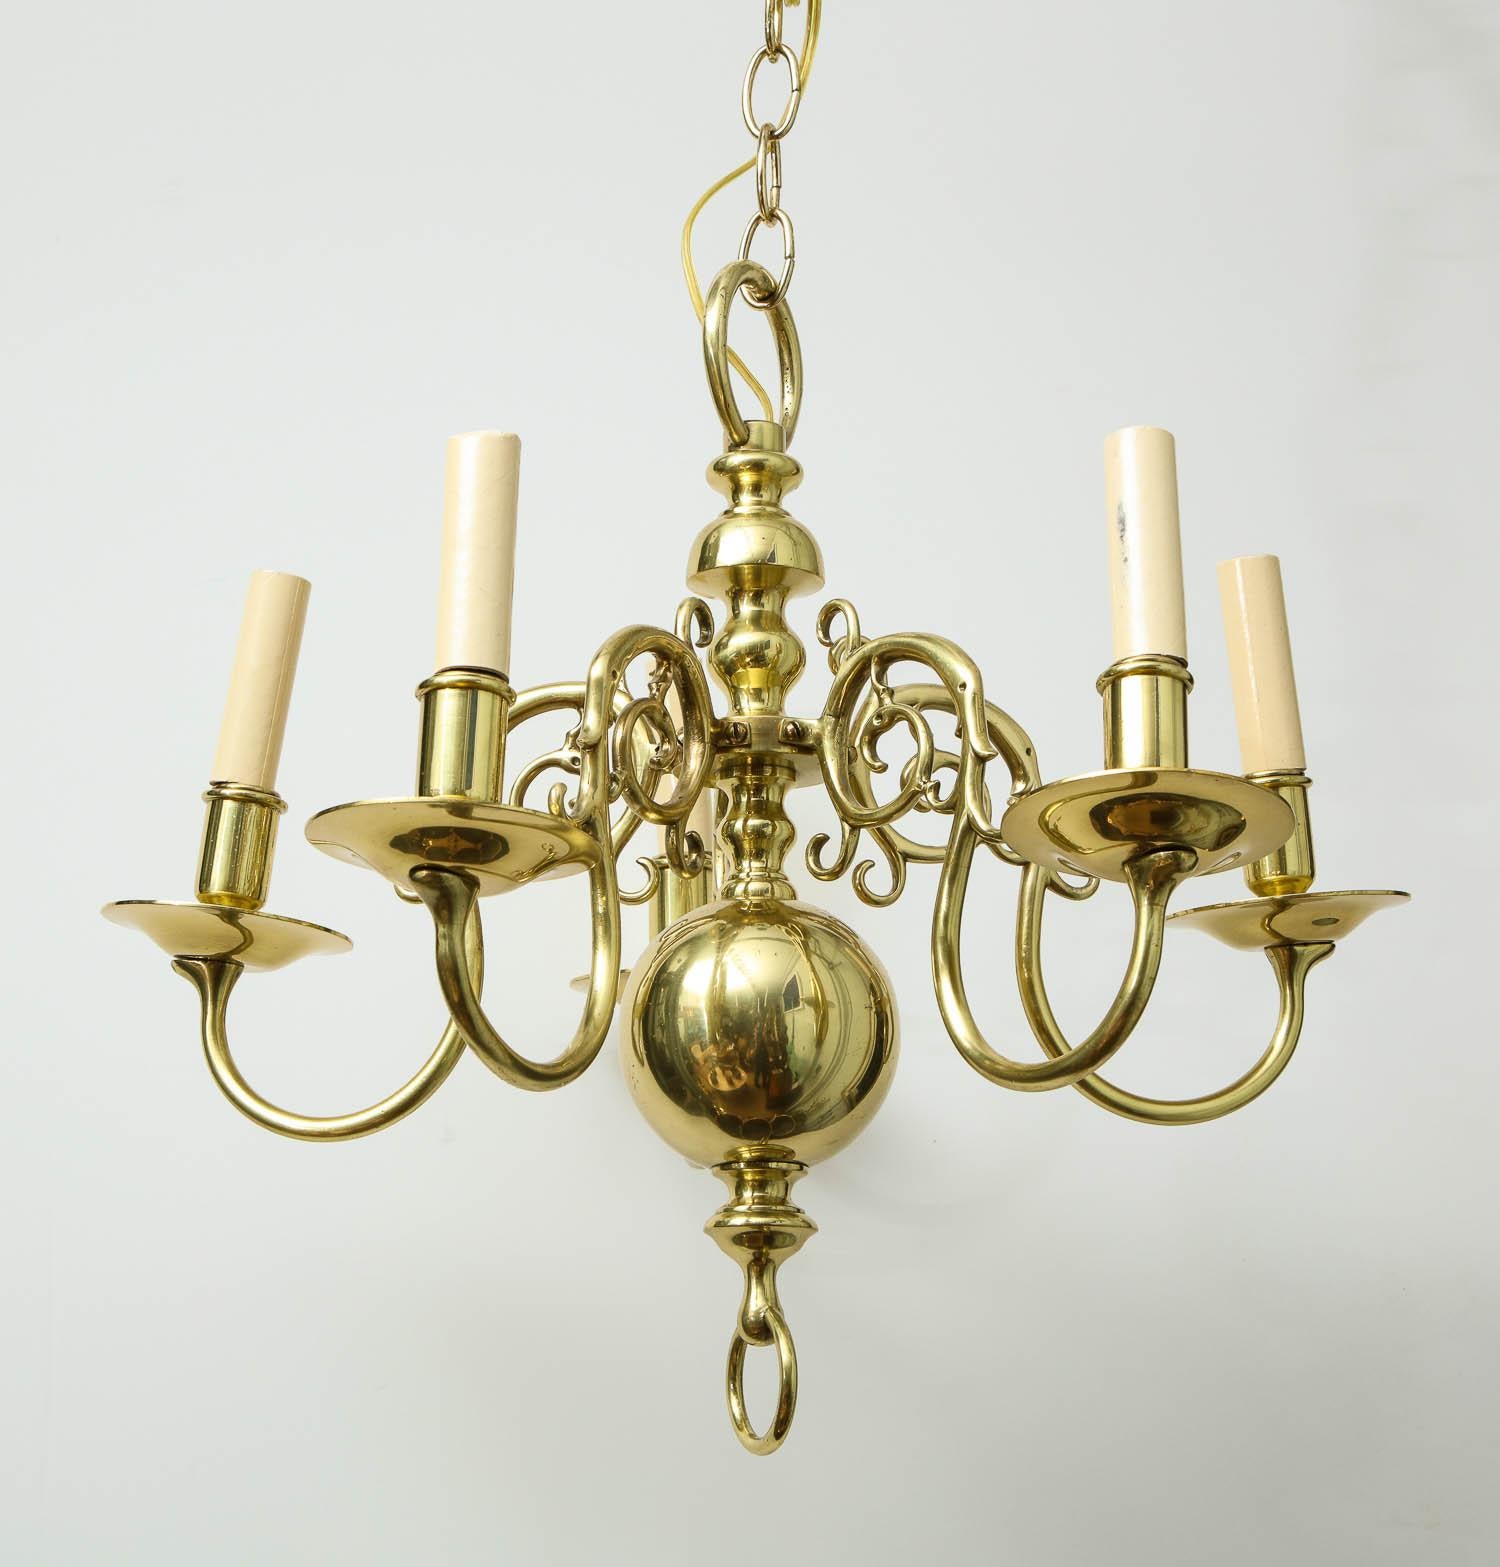 Good 20th century brass five-light chandelier with scrolled arms, the turned center shaft with large ball pediment with suspended ring. Recently polished and rewired.

Measures: 16